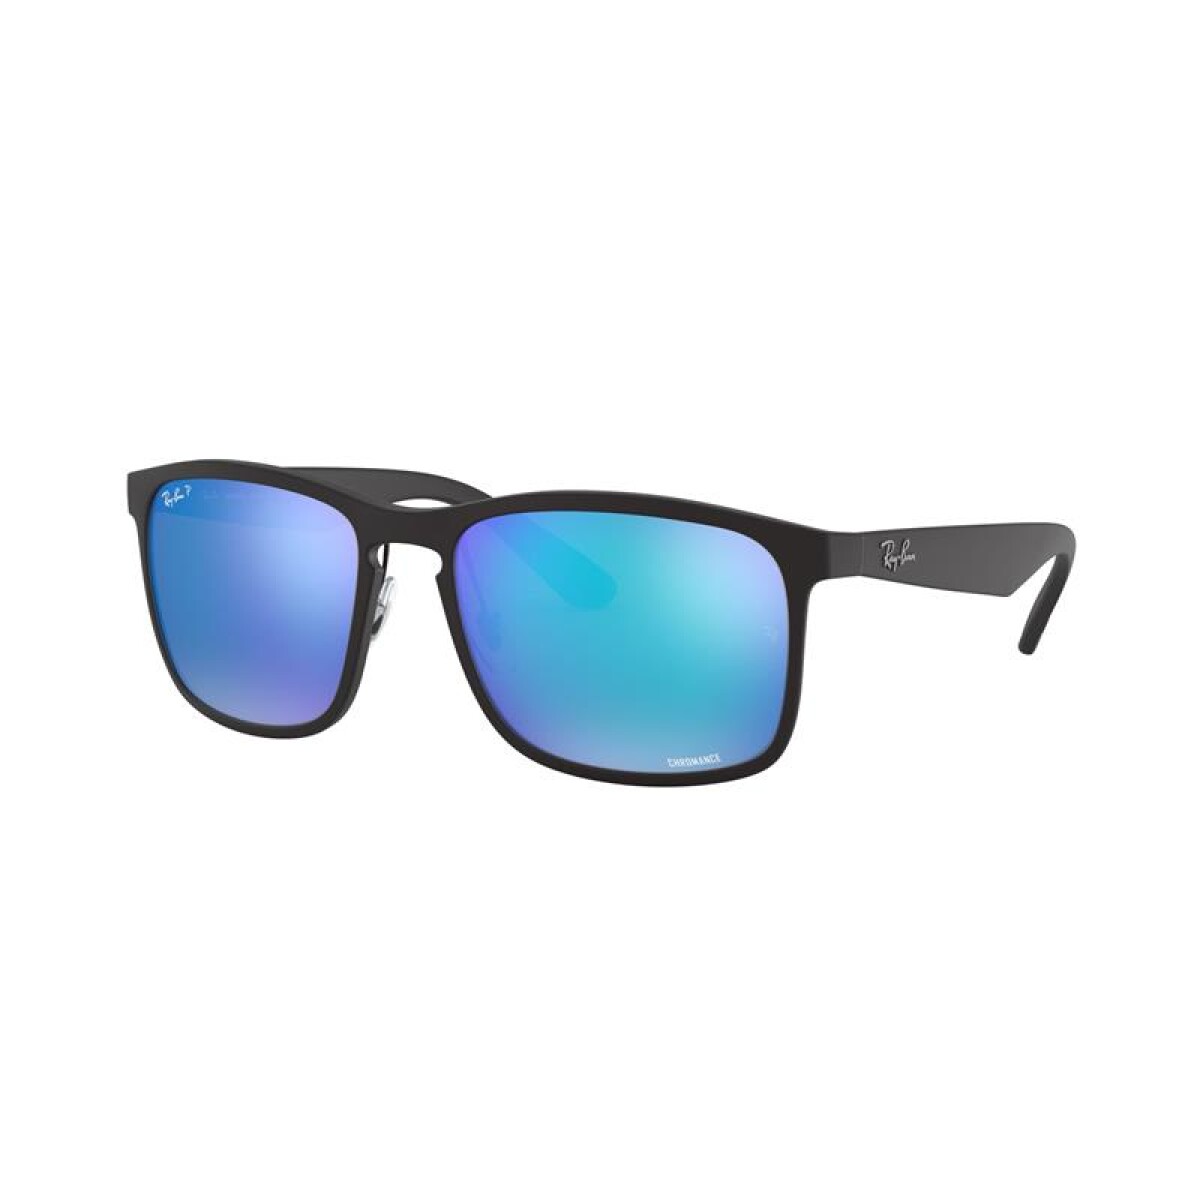 Ray Ban Rb4264 - 601-s/a1 